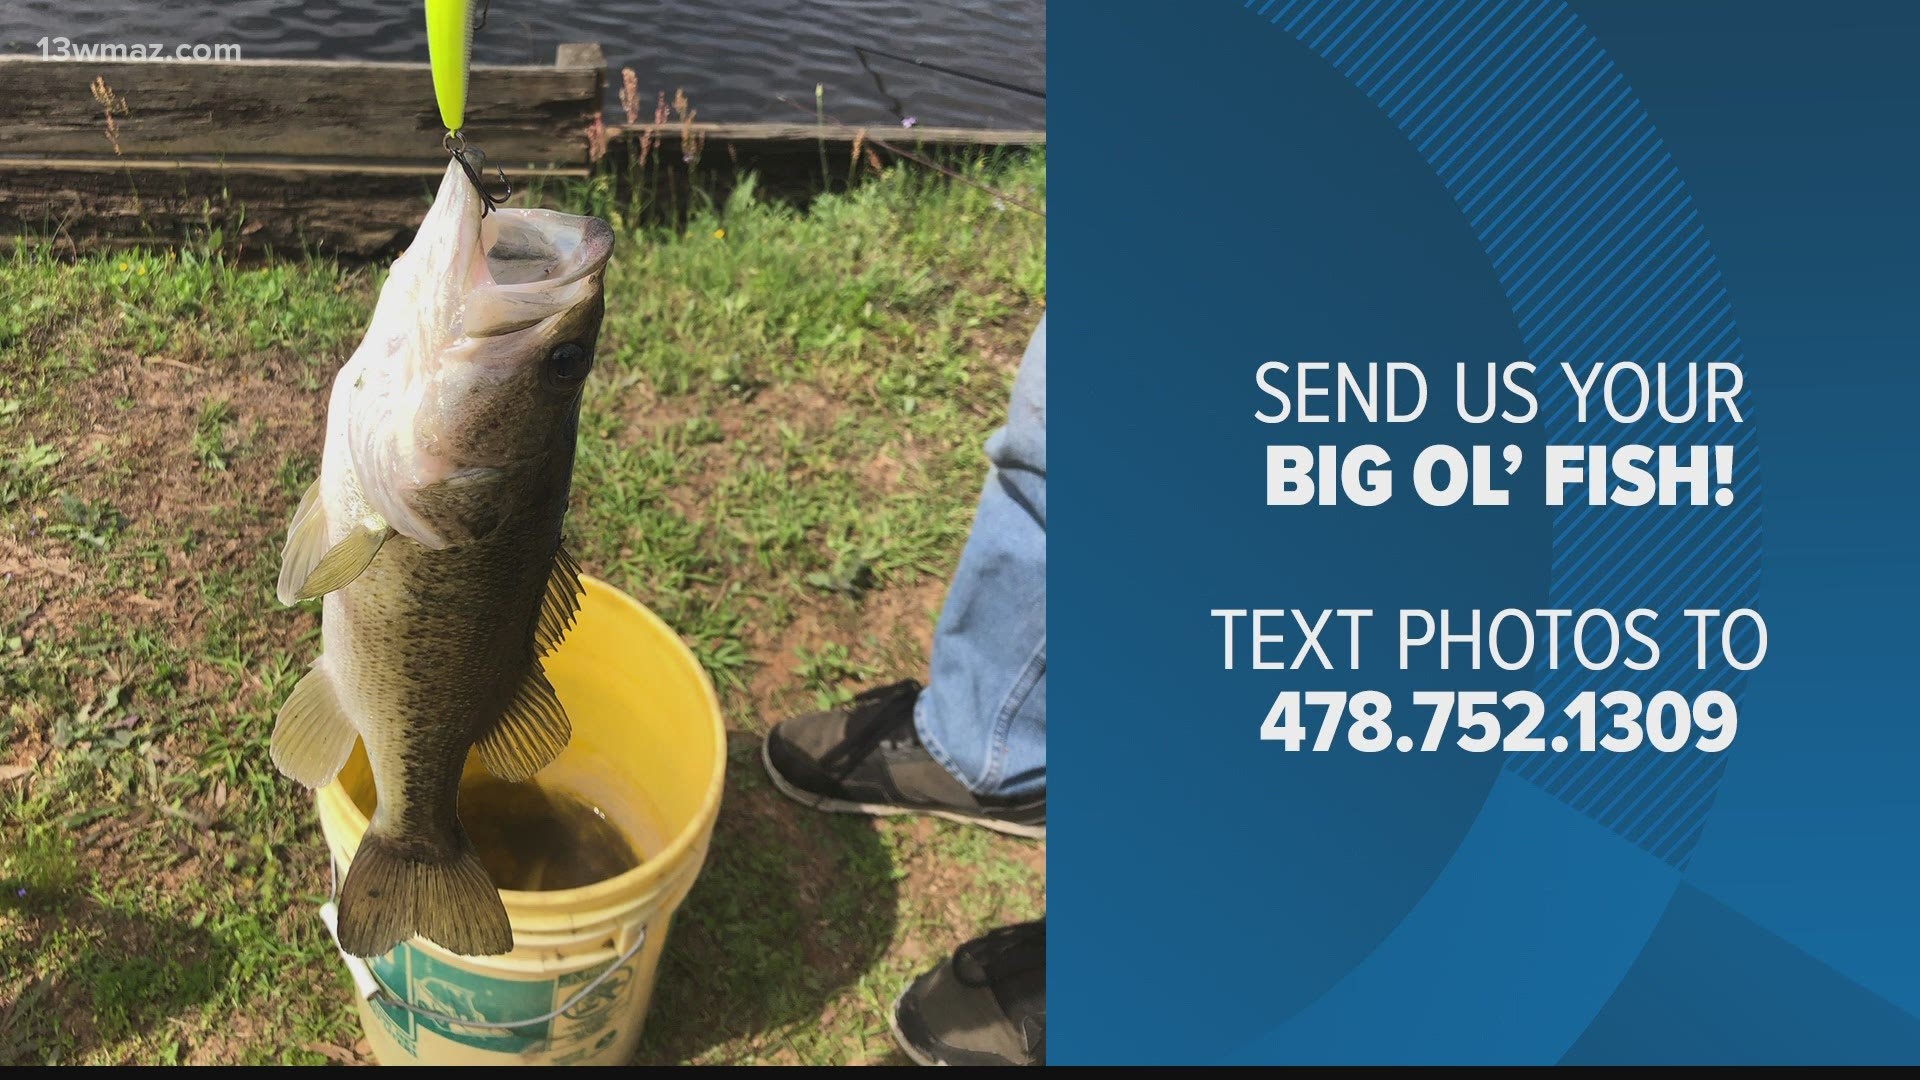 Attention all fishermen! We want to see your Big Ol' Fish photos.